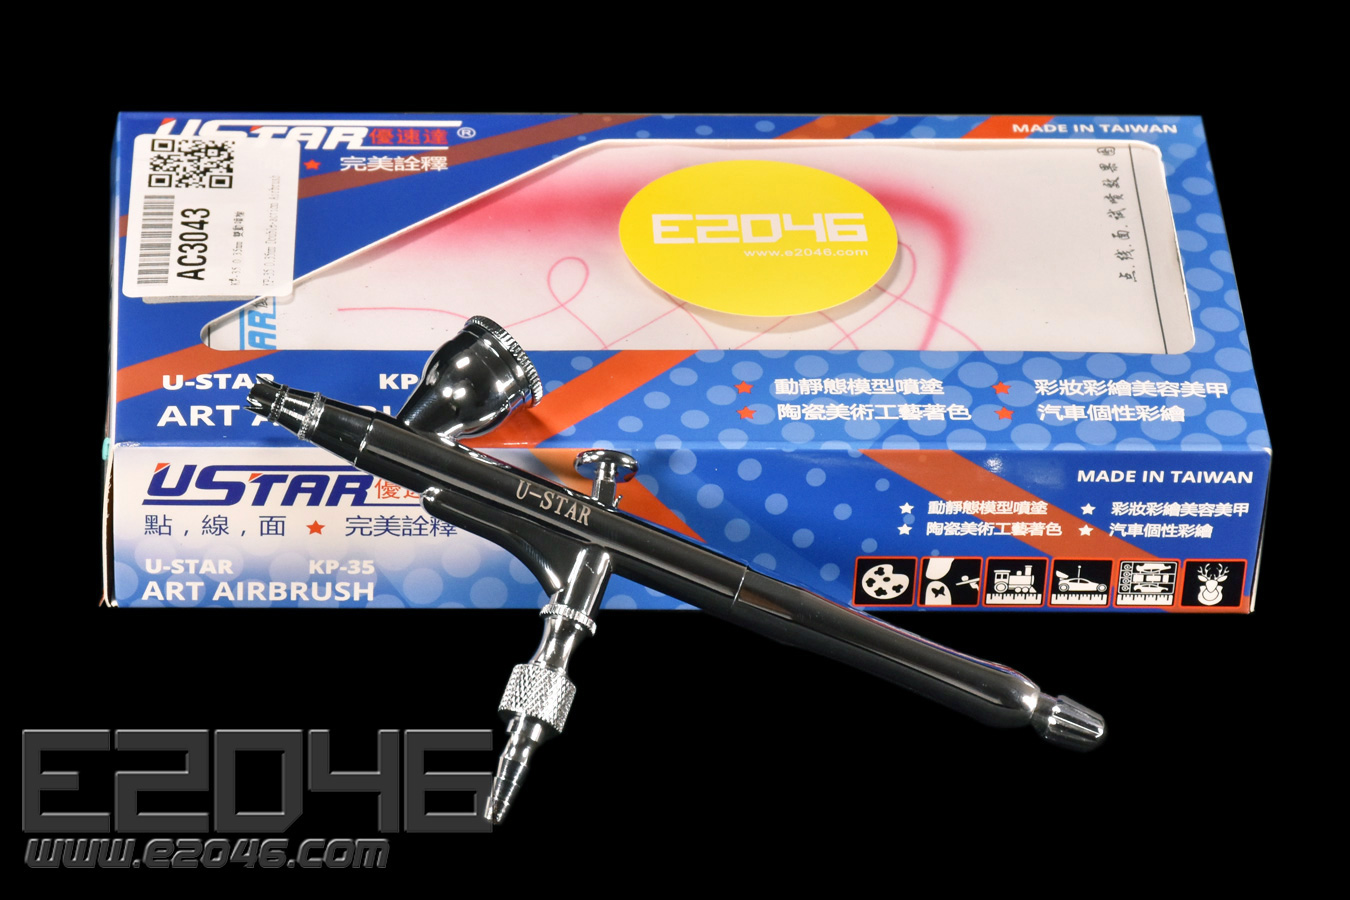 KP-35 0.35mm Double-action Airbrush